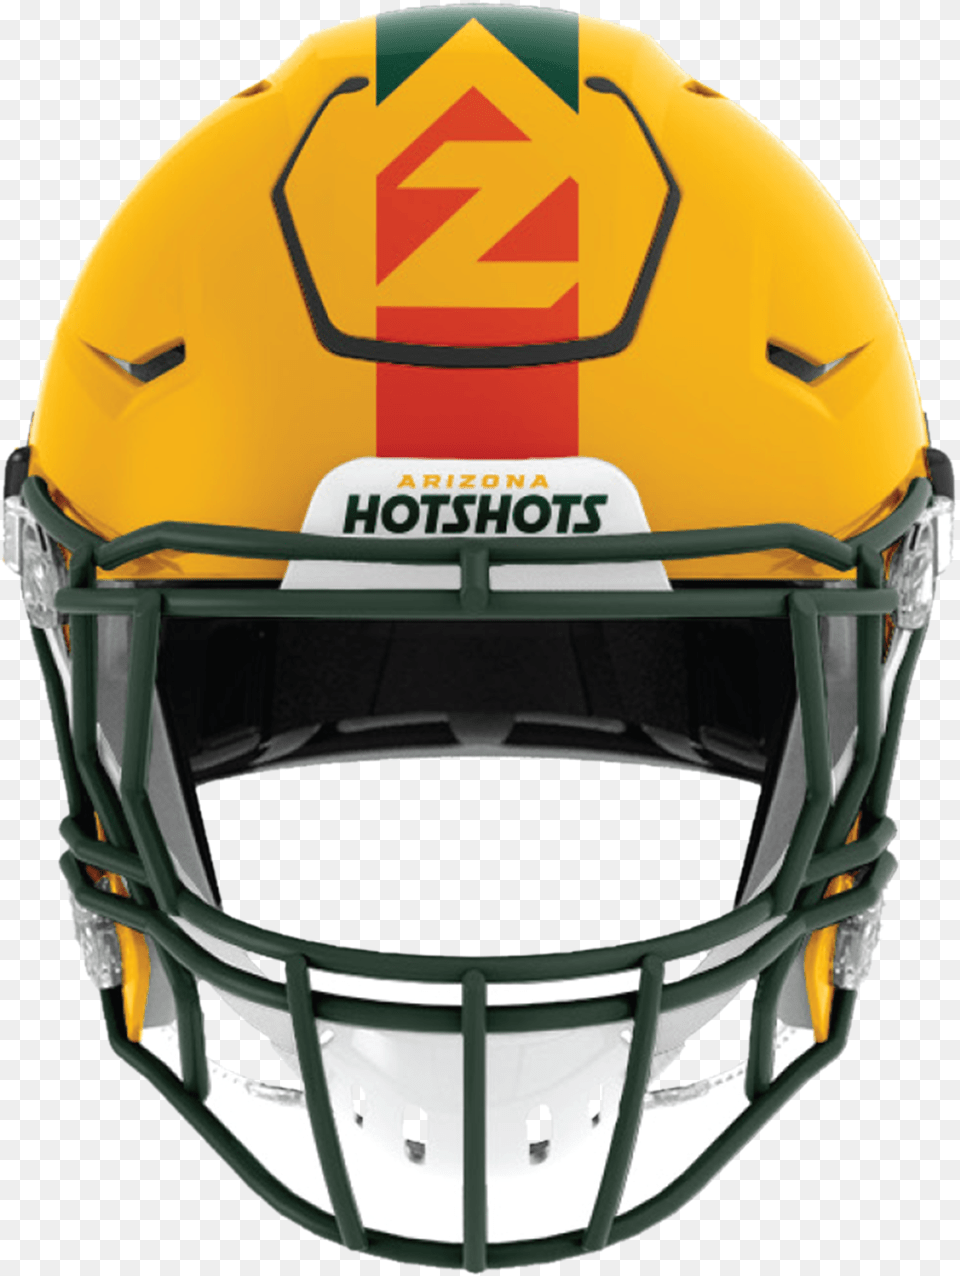 The Alliance On Twitter Alliance Of American Football Helmets, Helmet, Crash Helmet, American Football, Playing American Football Free Transparent Png